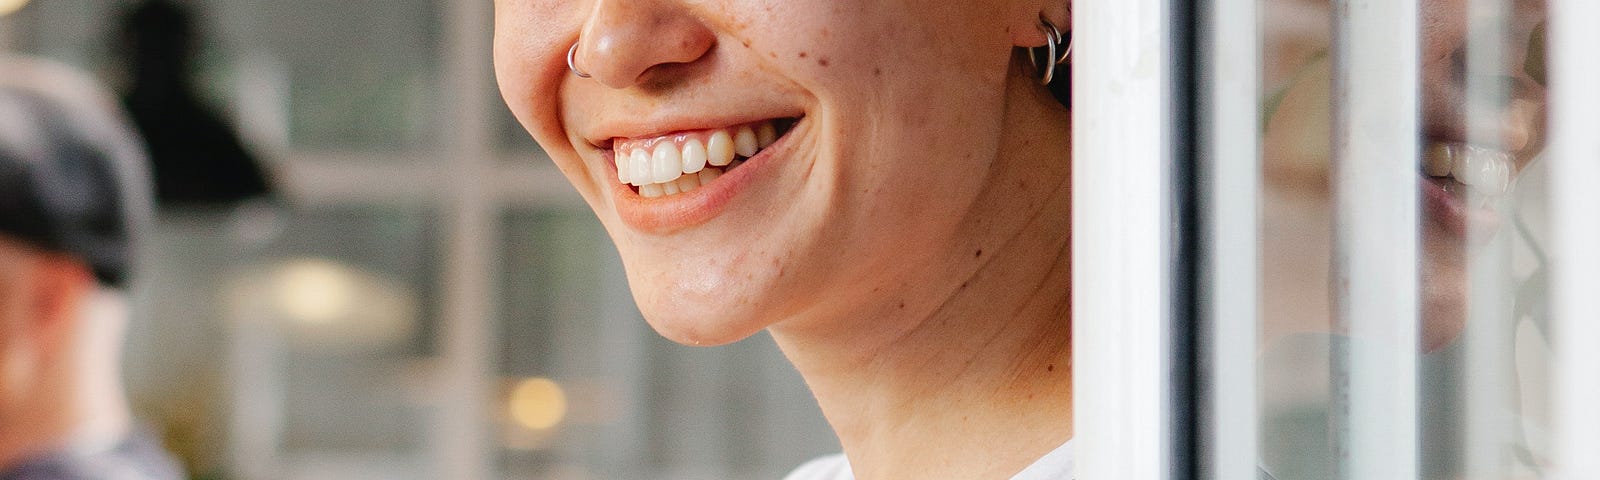 Woman with freckles, red hair, smiling